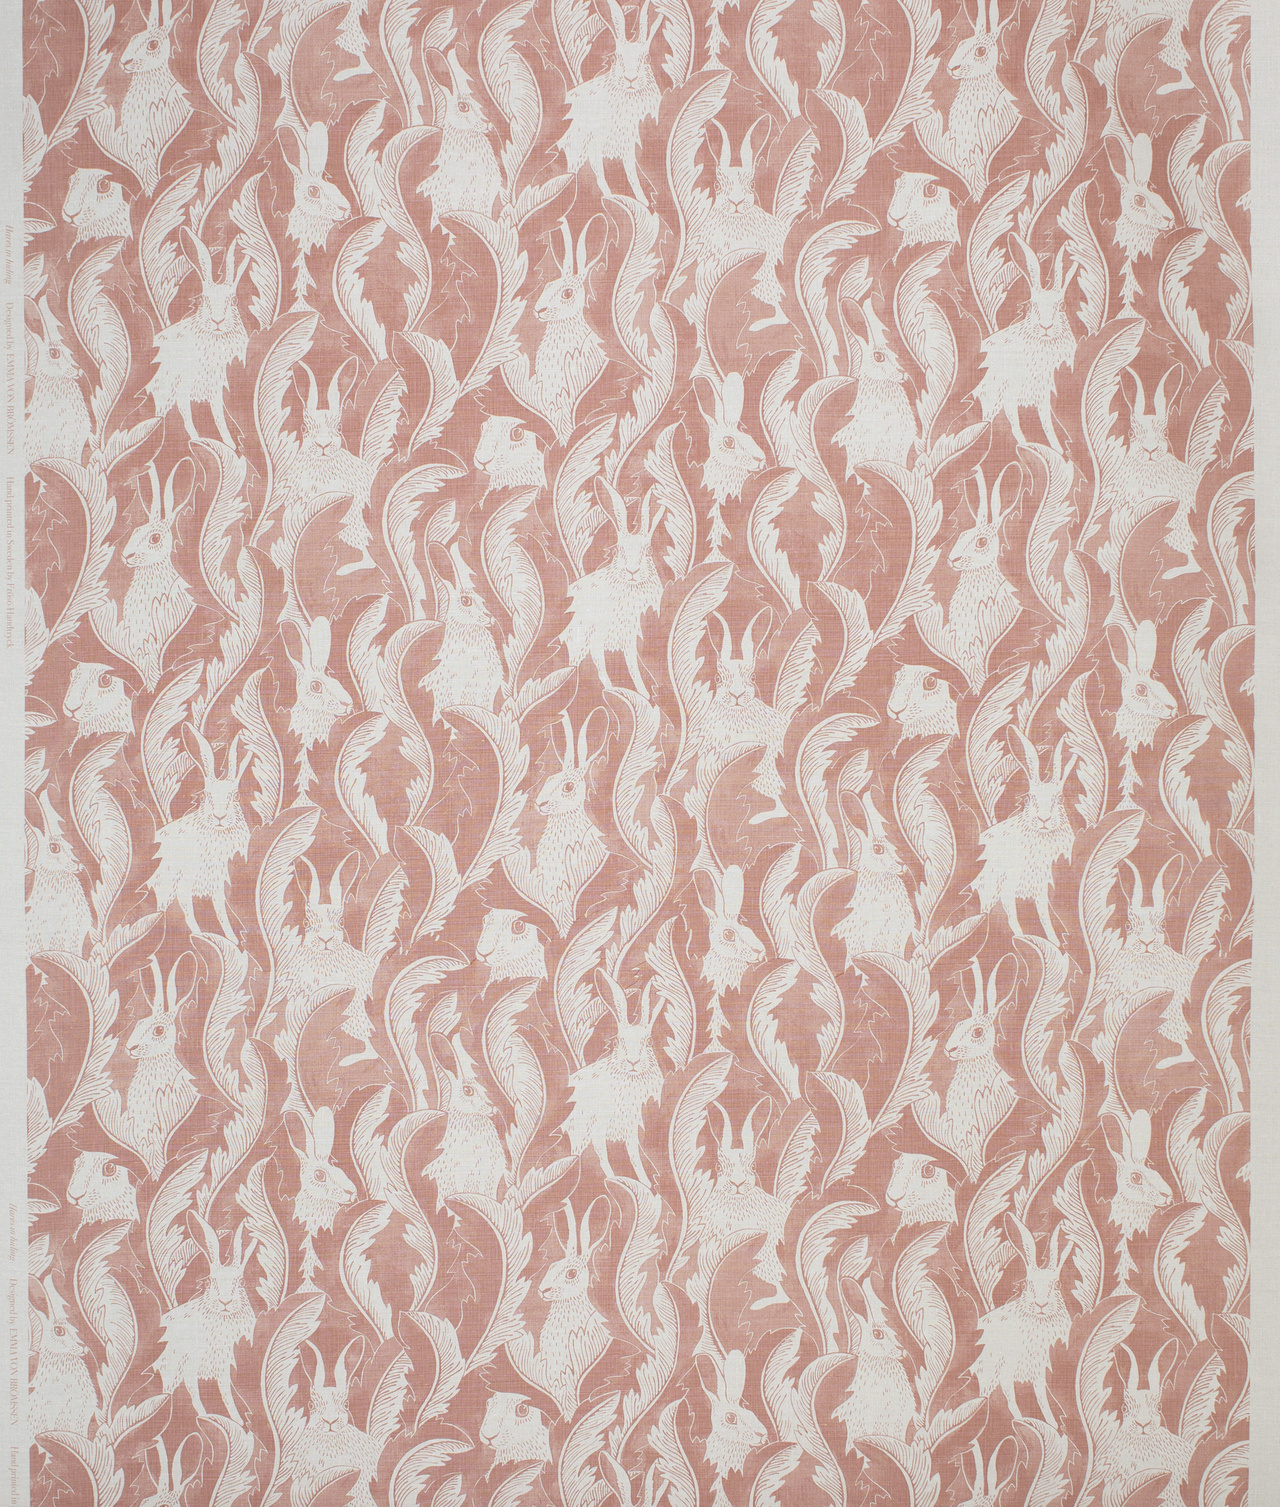 Linen fabric "Hares in hiding” Pink